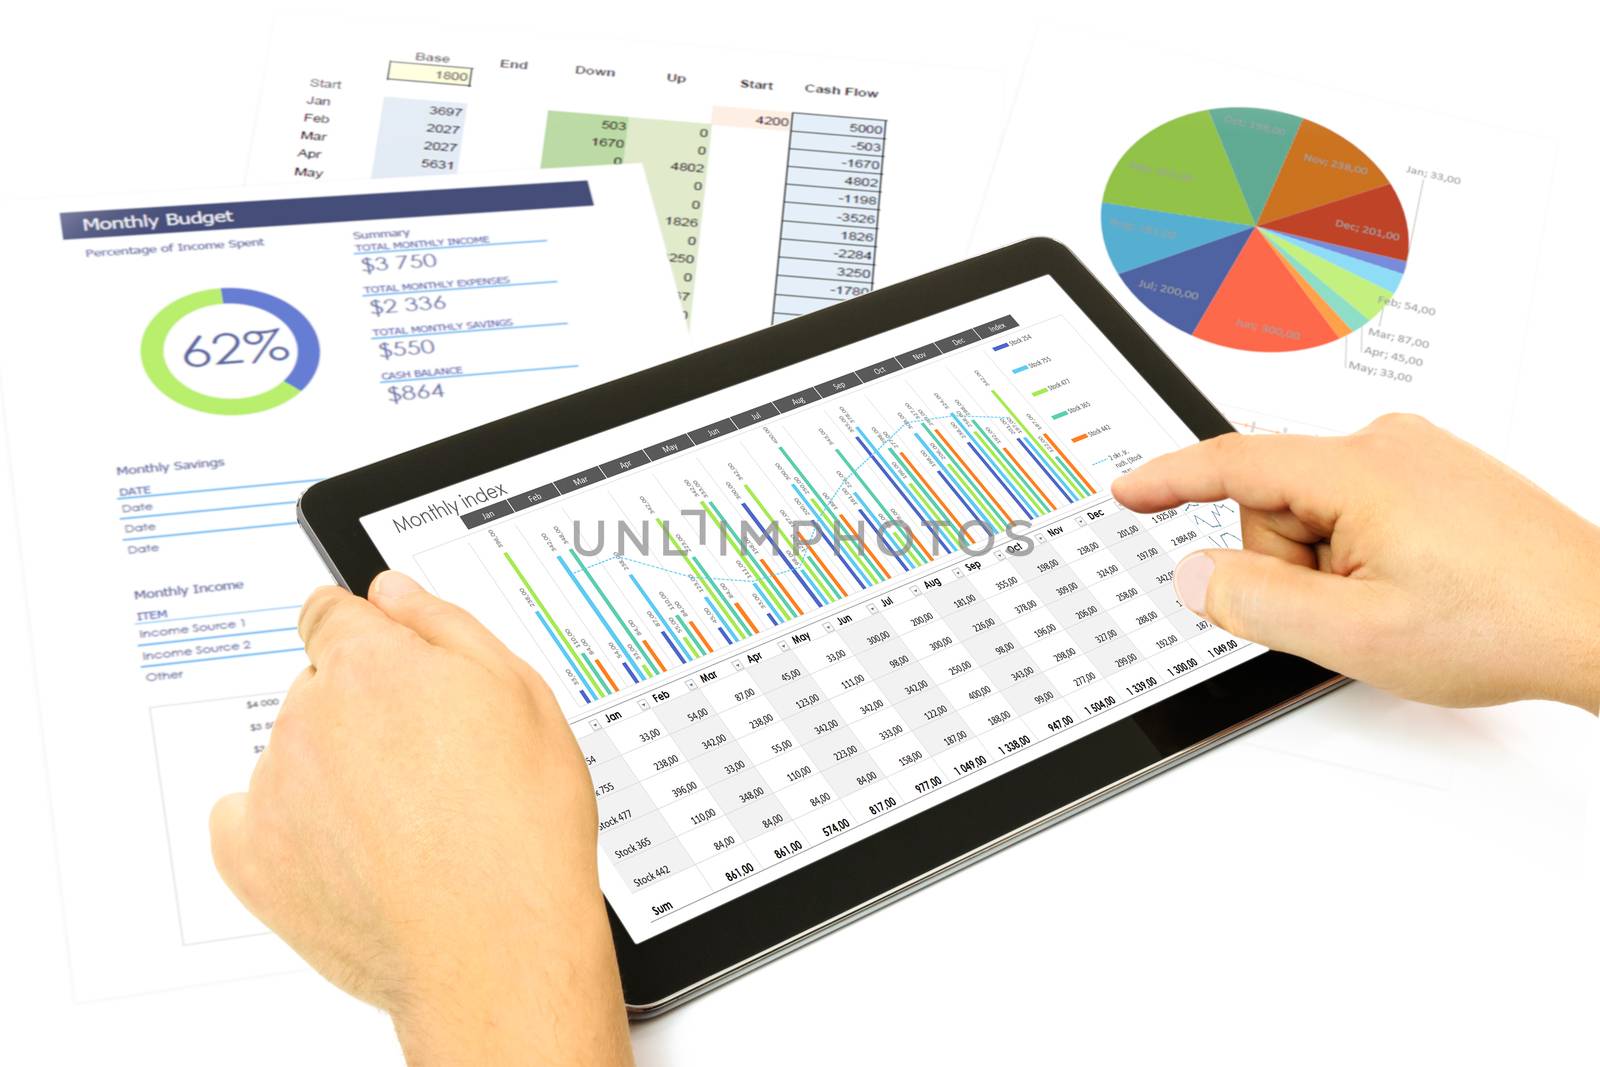 Analyzing financial data on the tablet by wdnet_studio